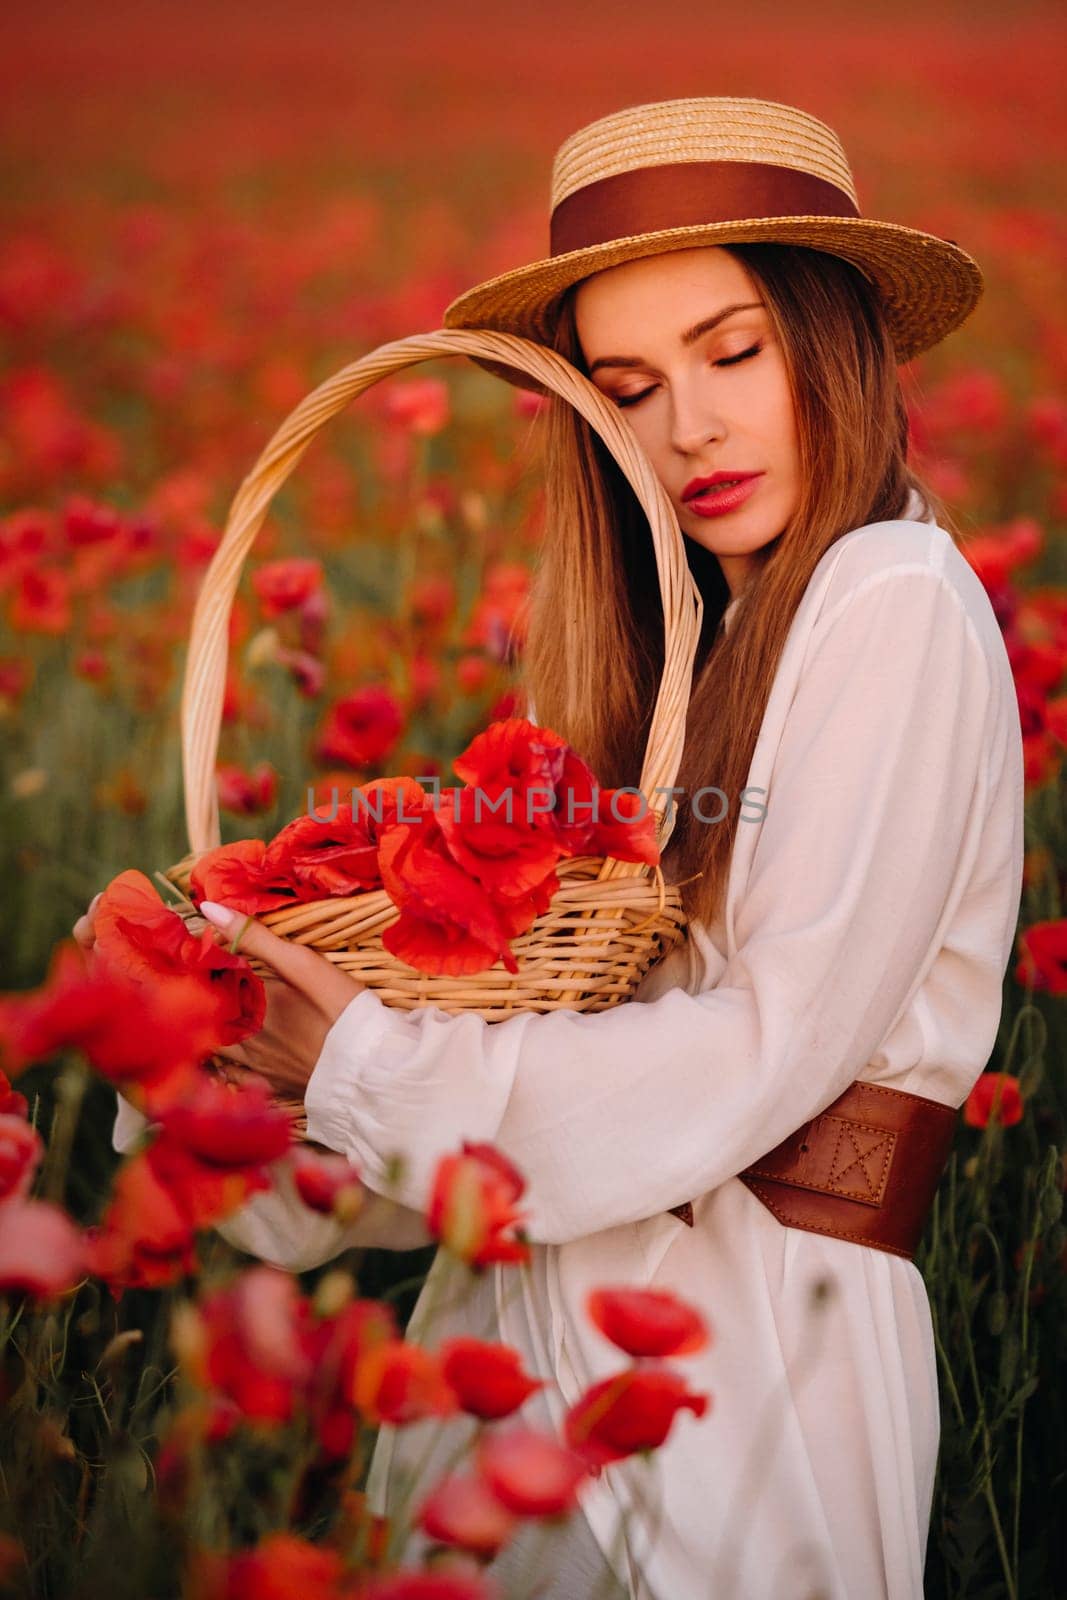 a girl in a white dress, a hat and with a basket in a field with poppies.